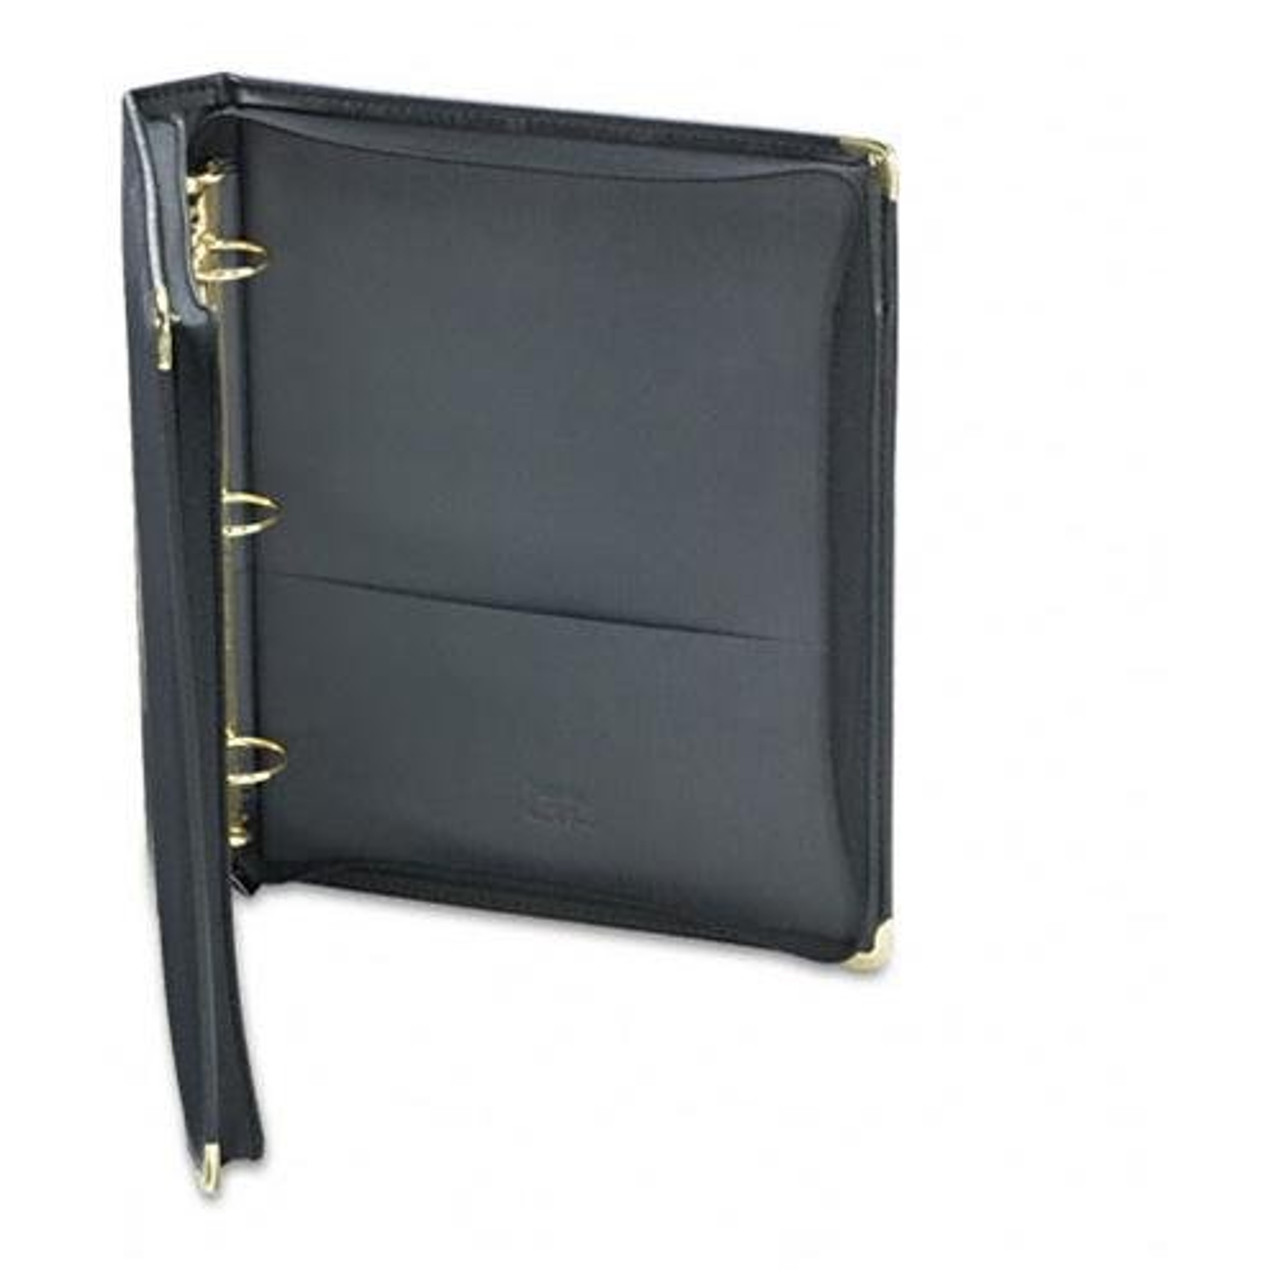 Samsill Classic Collection Zippered Ring Binder 